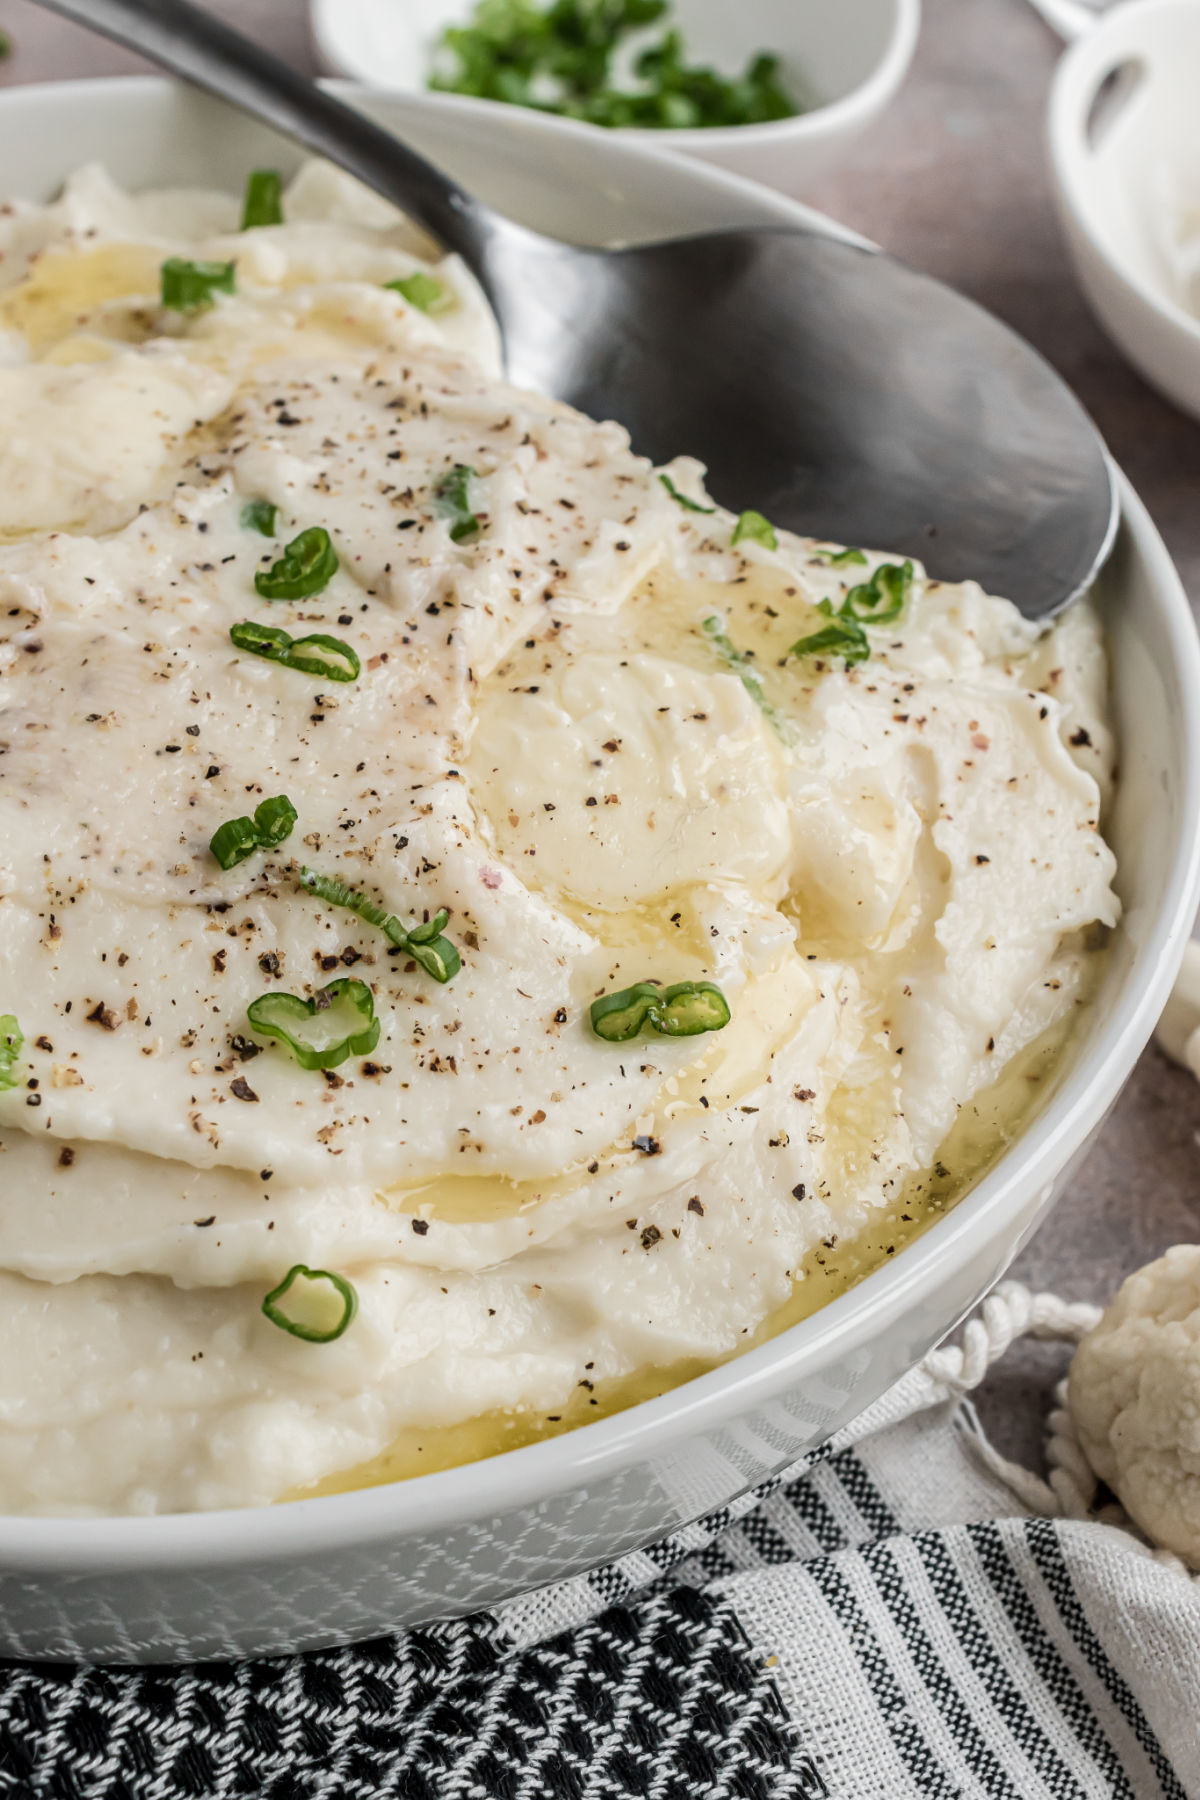 Mashed cauliflower with garlic, herbs, and butter.